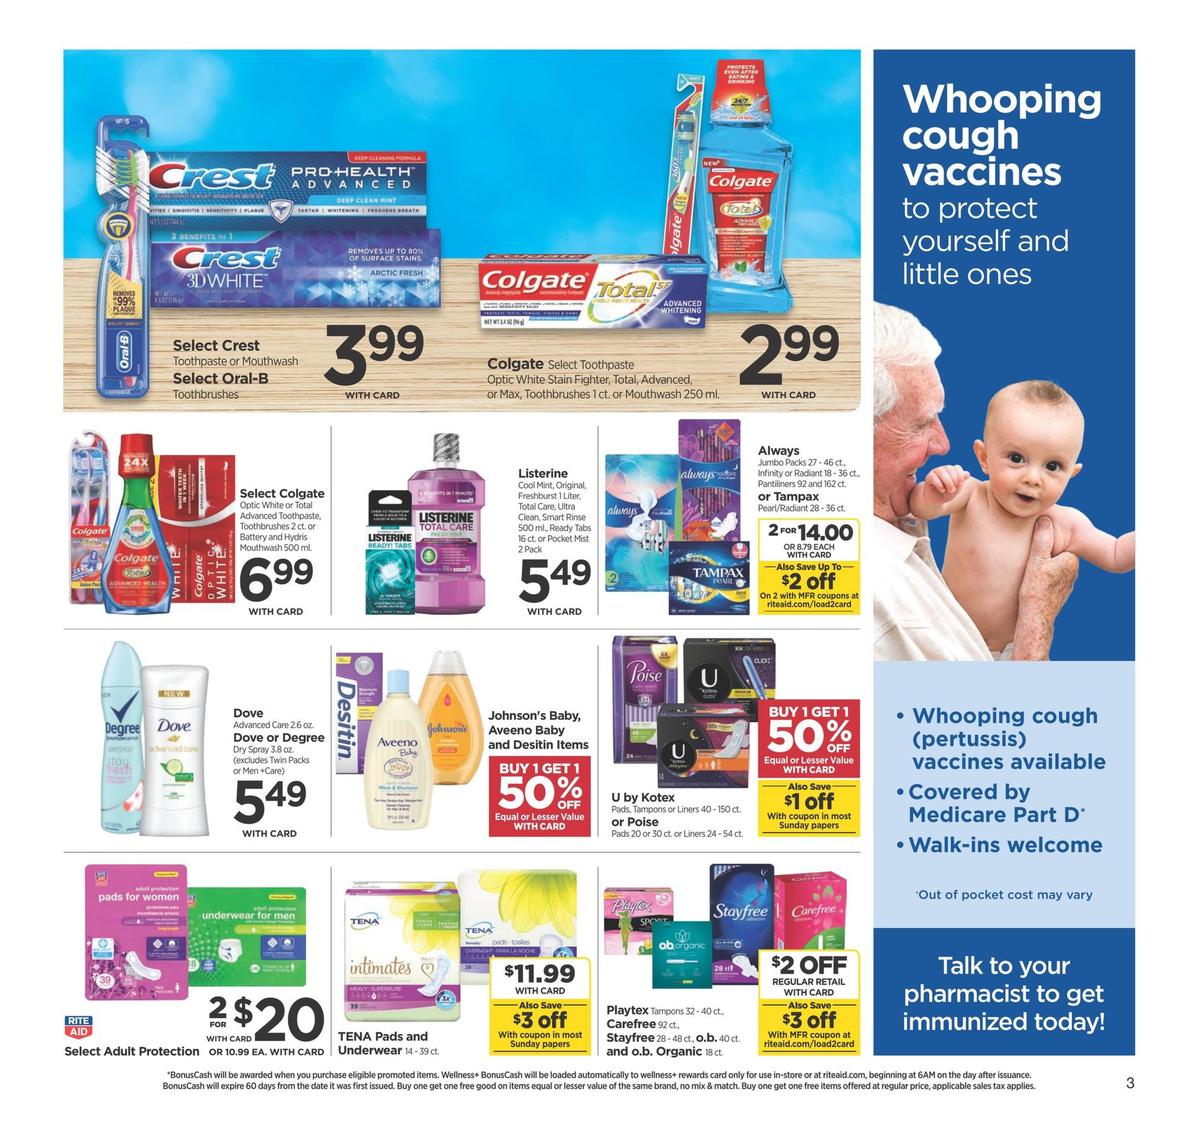 Rite Aid Weekly Ad from June 9